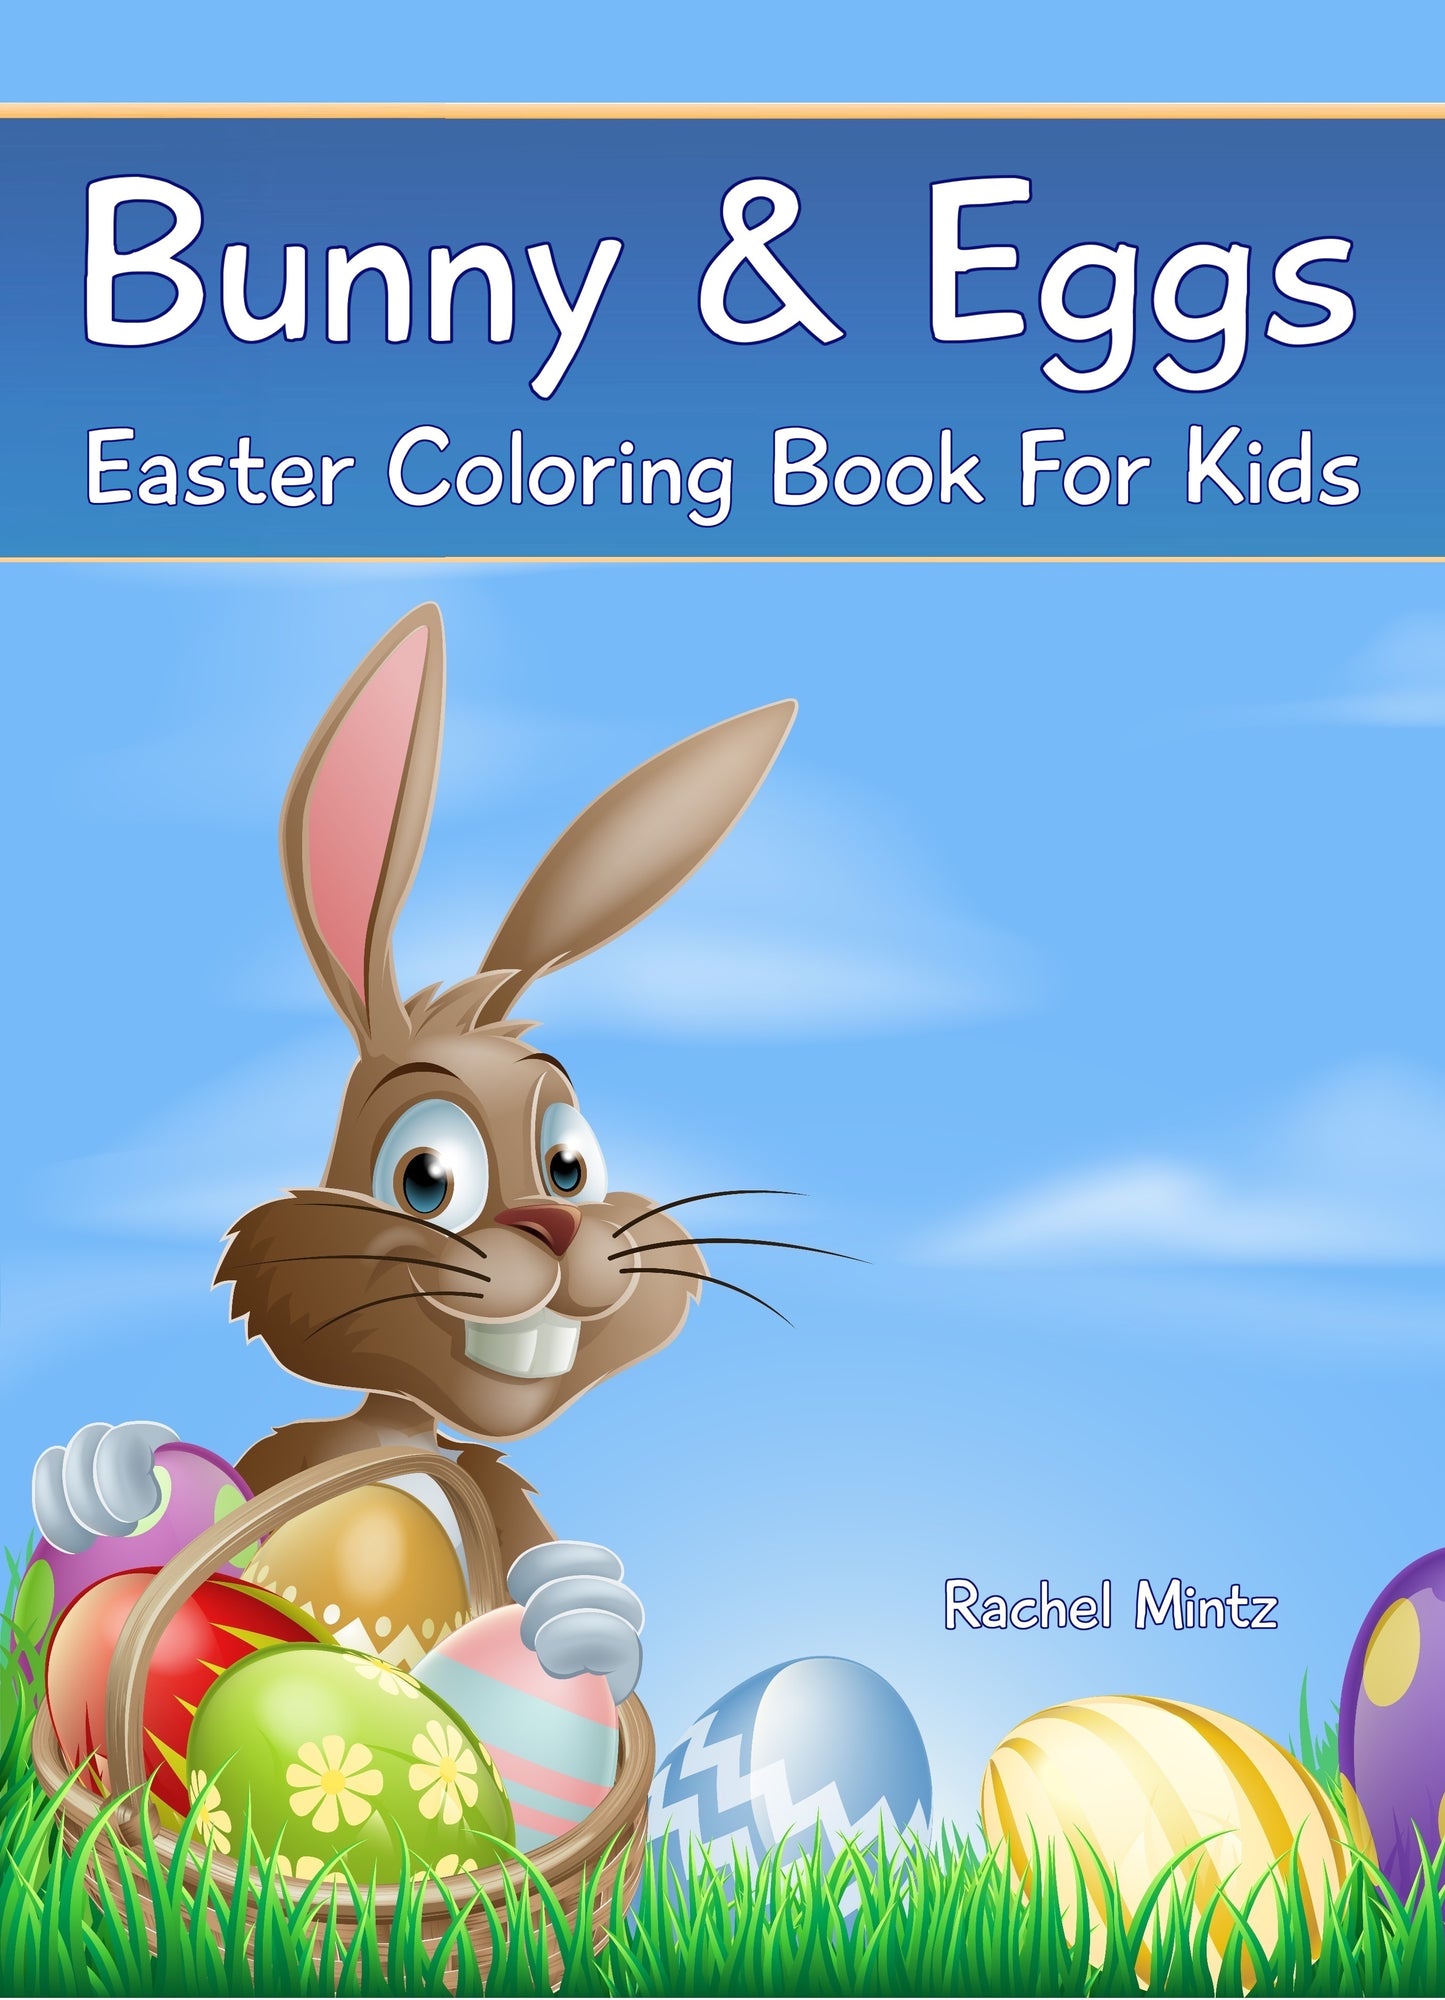 Bunny and Eggs - Easter Coloring Book For Kids